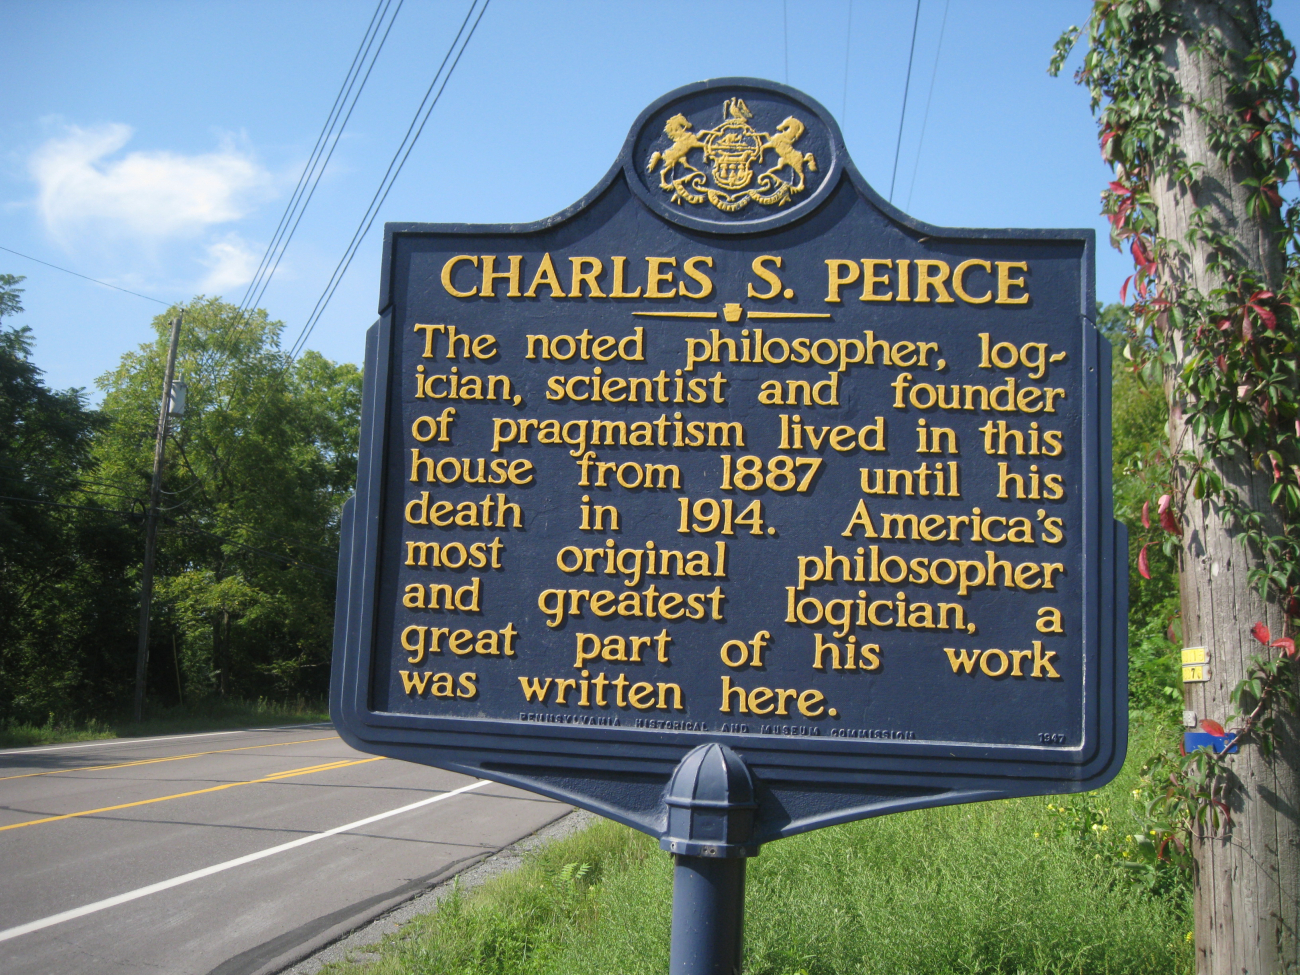 Roadside history marker noting Arisbe, the home of Charles Sanders Peirce,son of Benjamin Peirce, and considered one of America's greatest philosophers